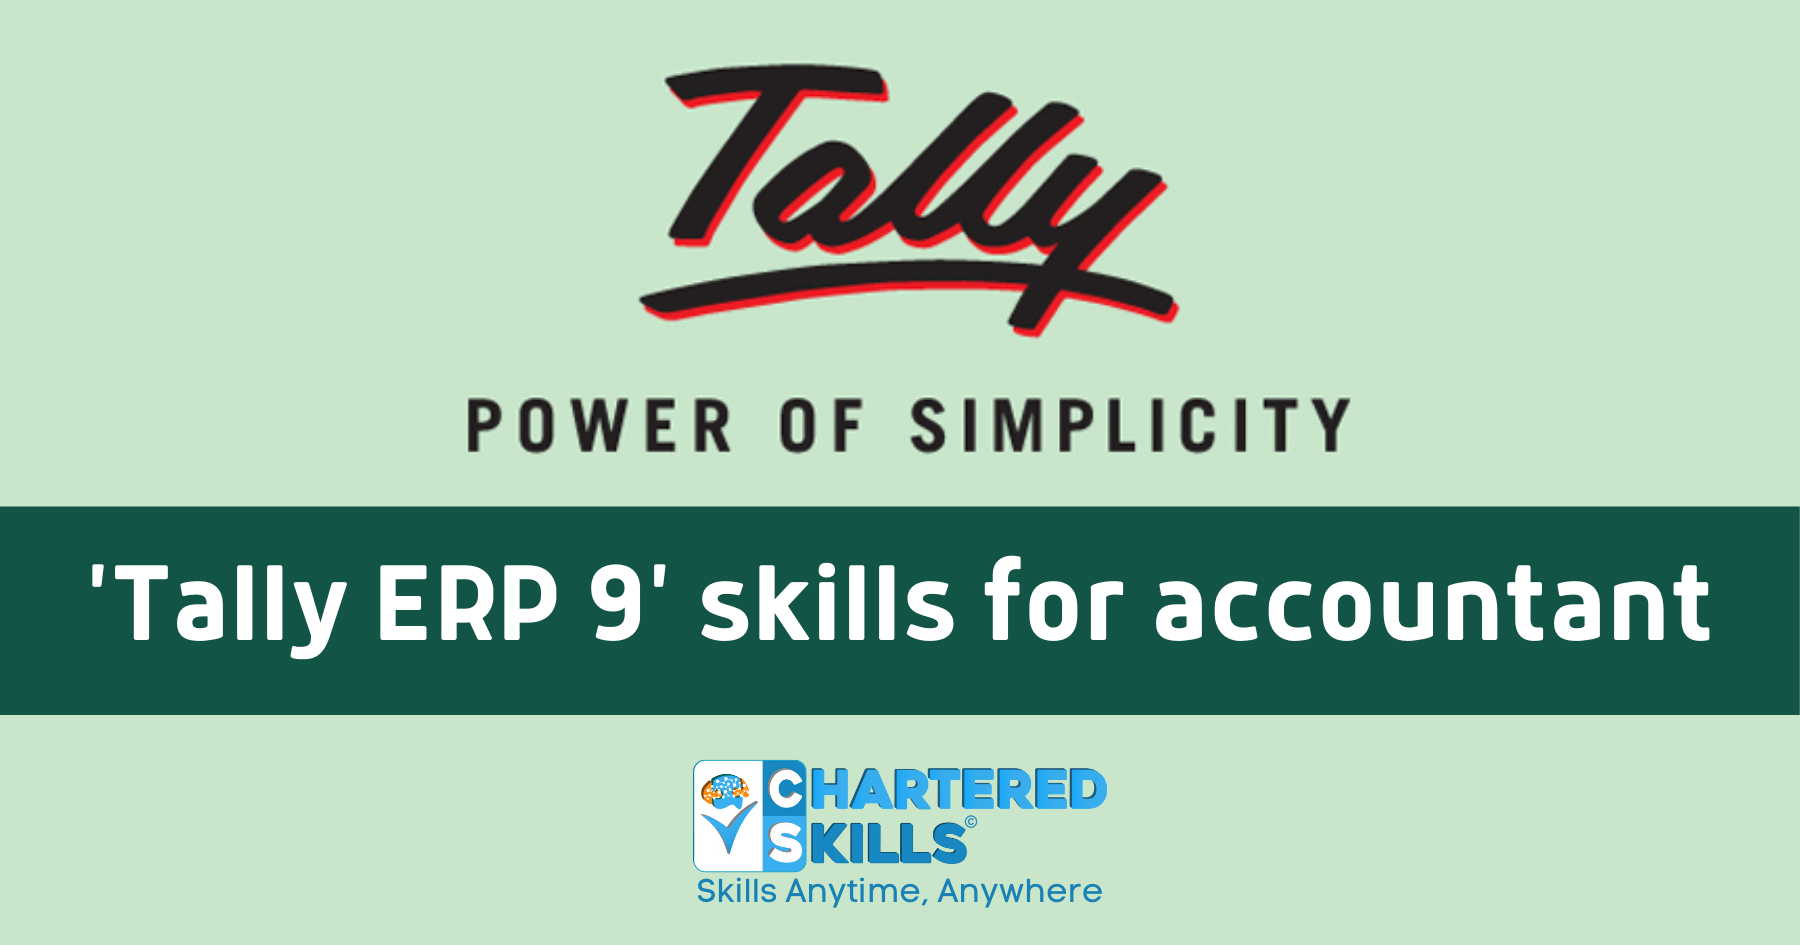 'Tally ERP 9' skills for accountant